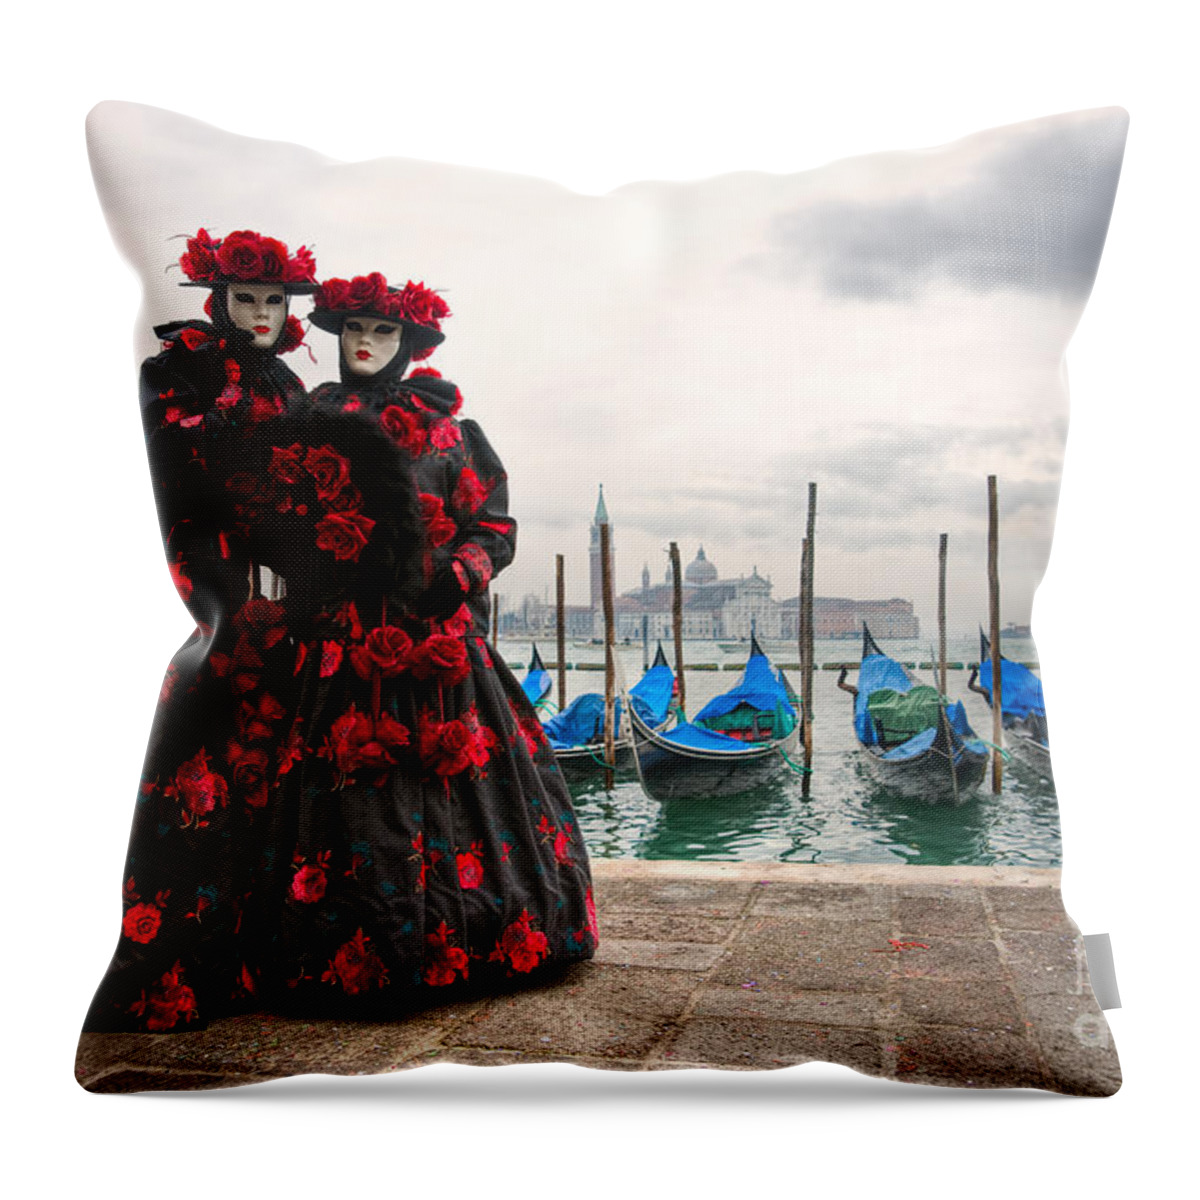 Carnaval Throw Pillow featuring the photograph Venice Carnival Mask by Luciano Mortula